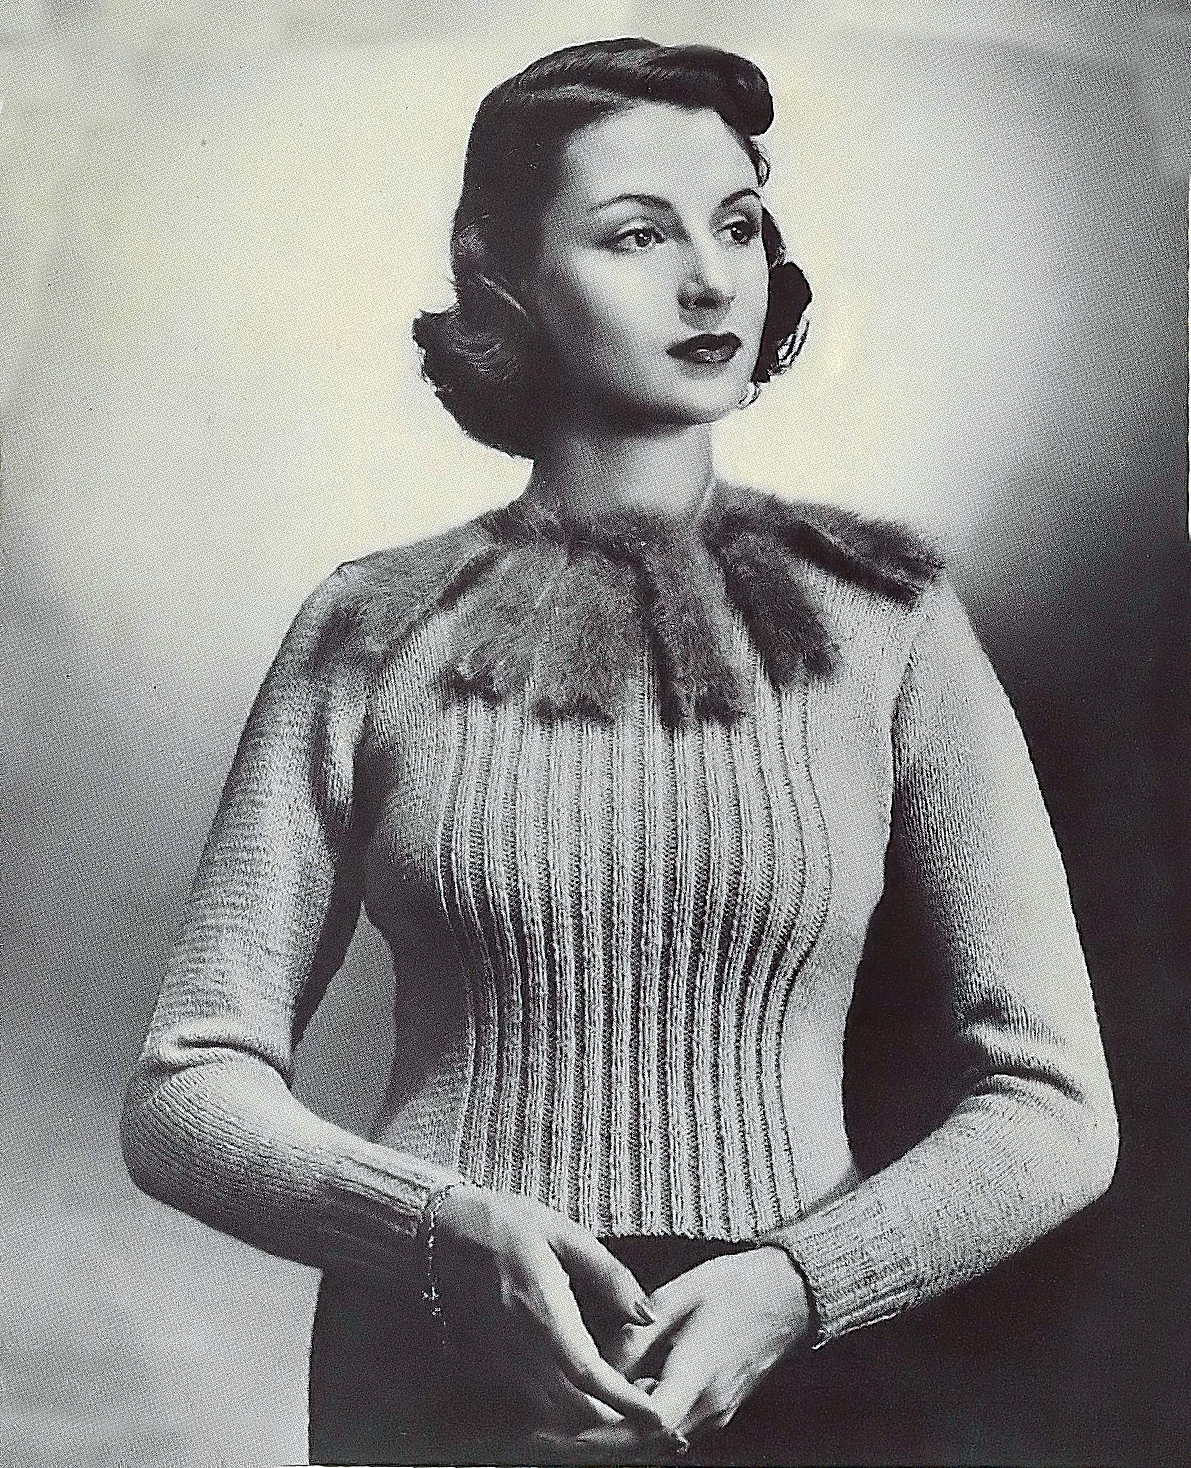 Spool Cotton Company's Sweater News from 1937